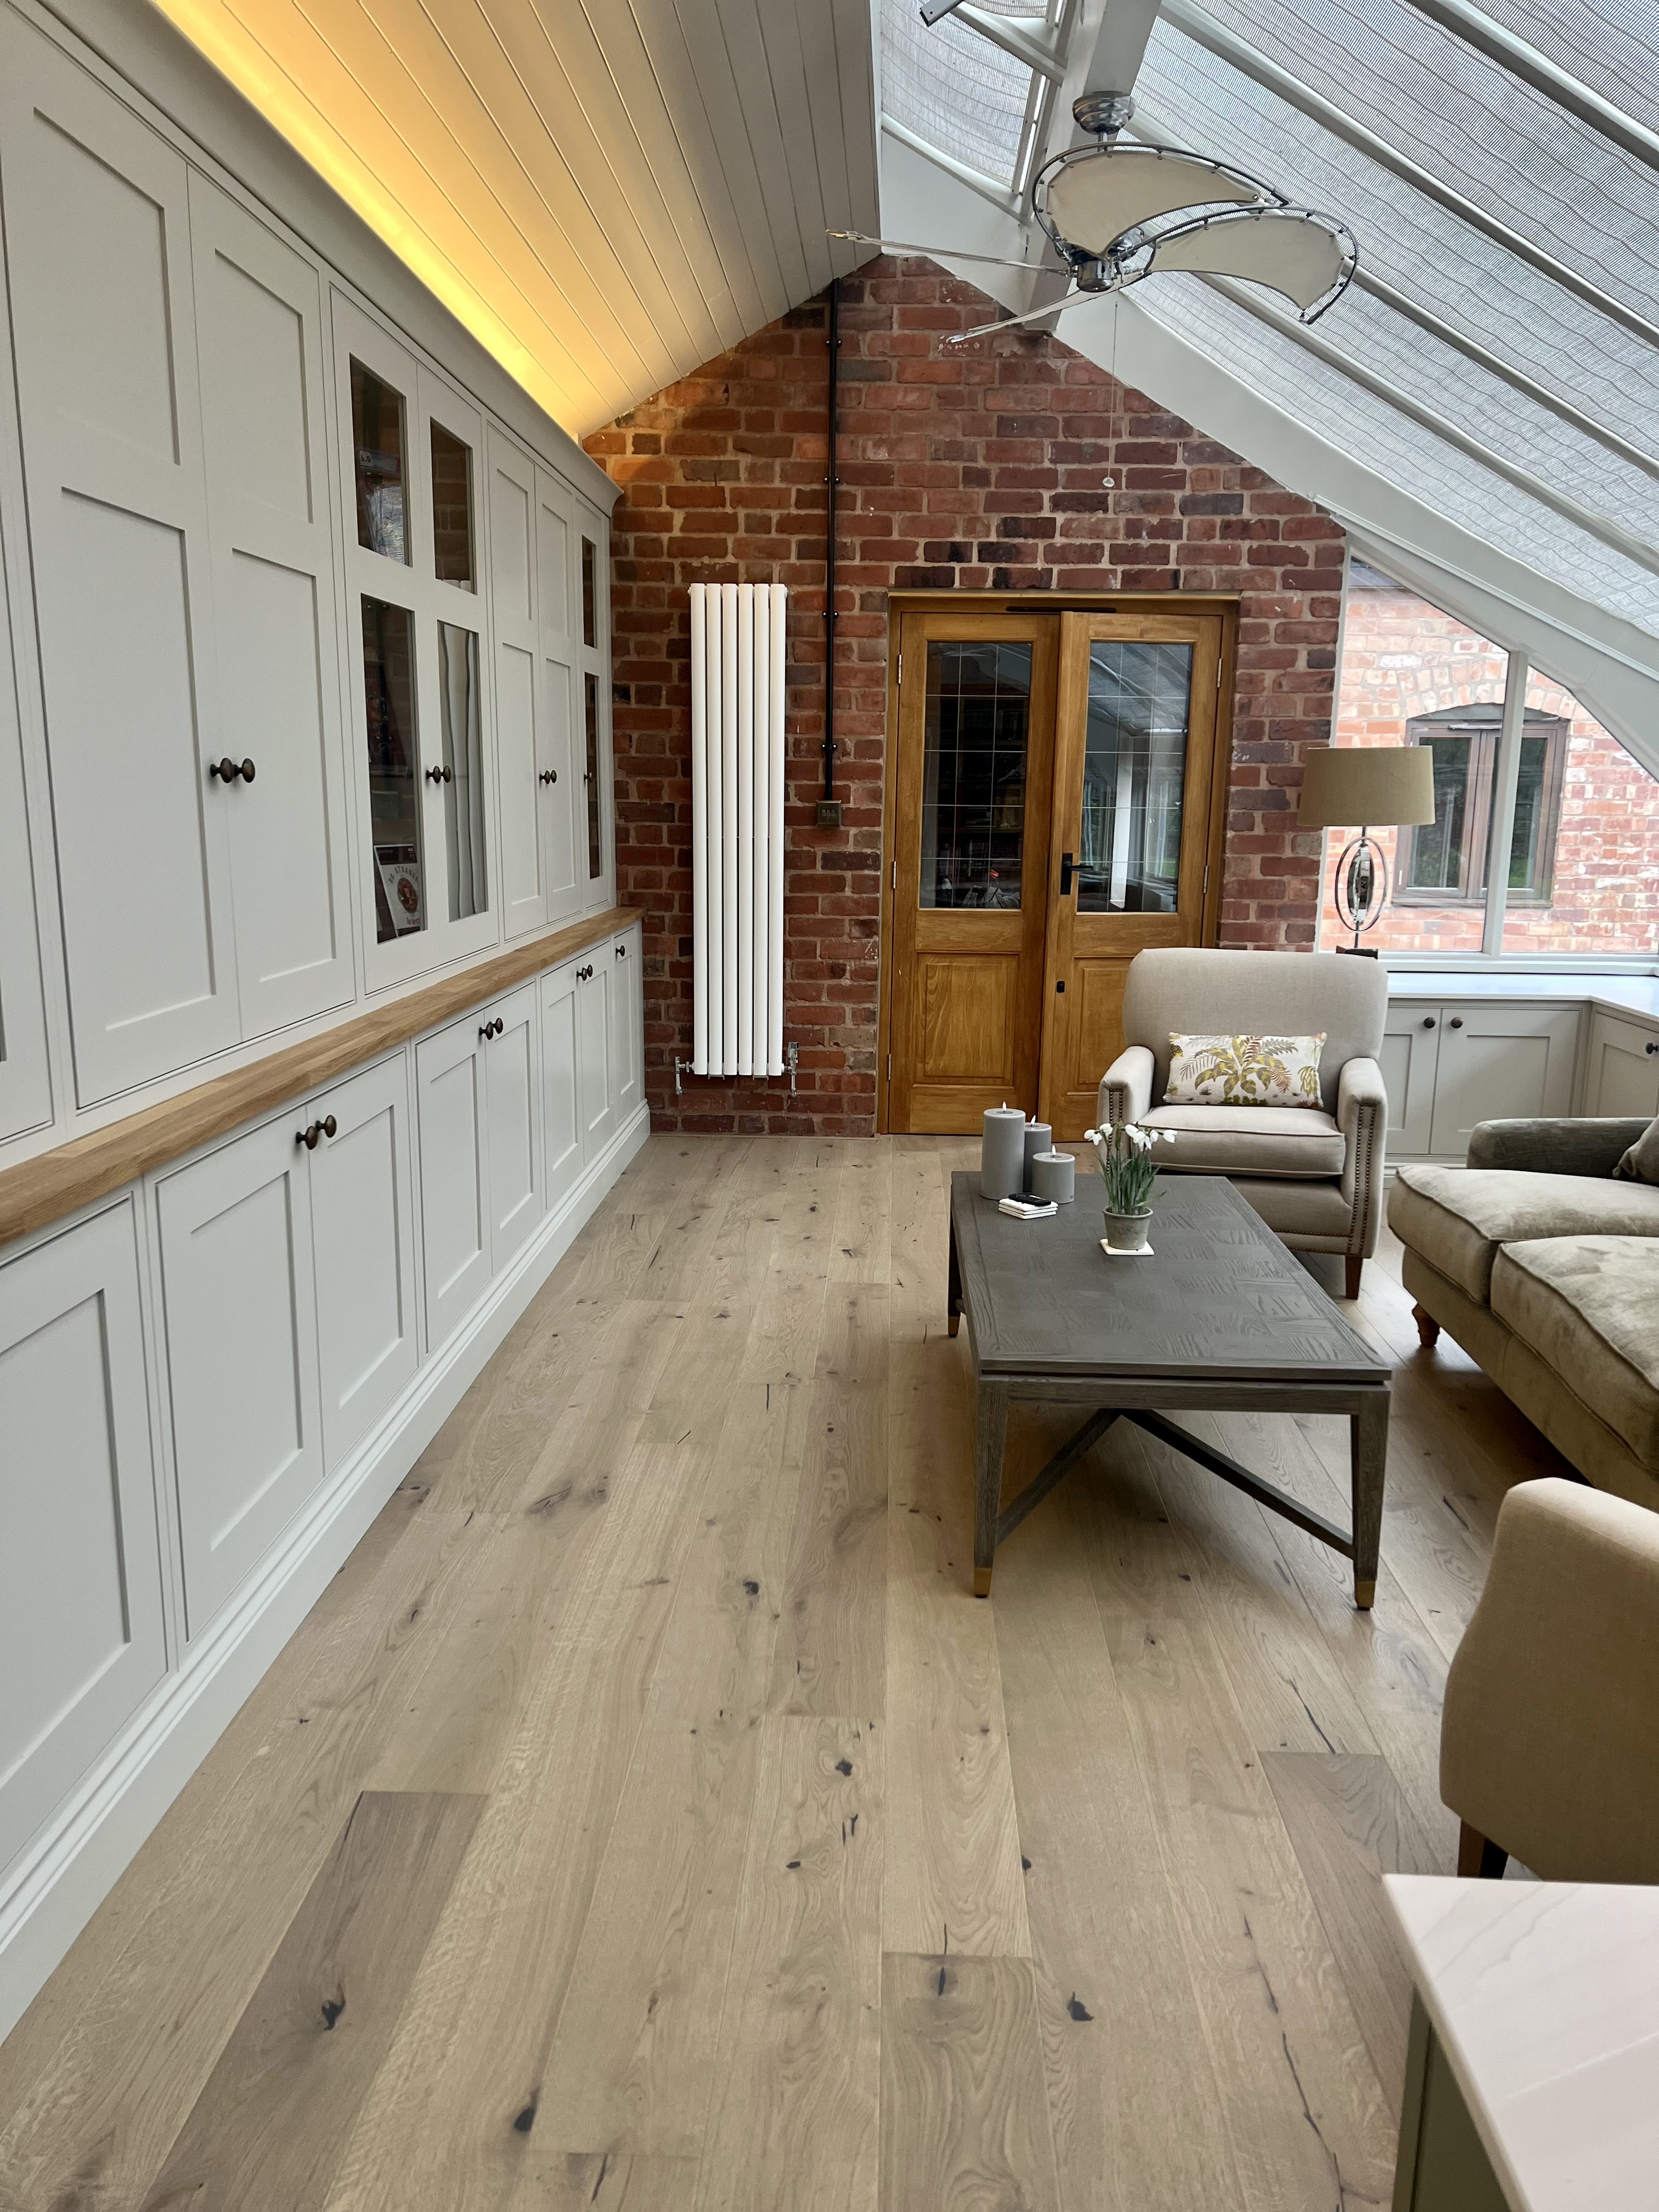 Renovation to large sun room on a listed building close to Stratford Upon Avon - bespoke cabinet